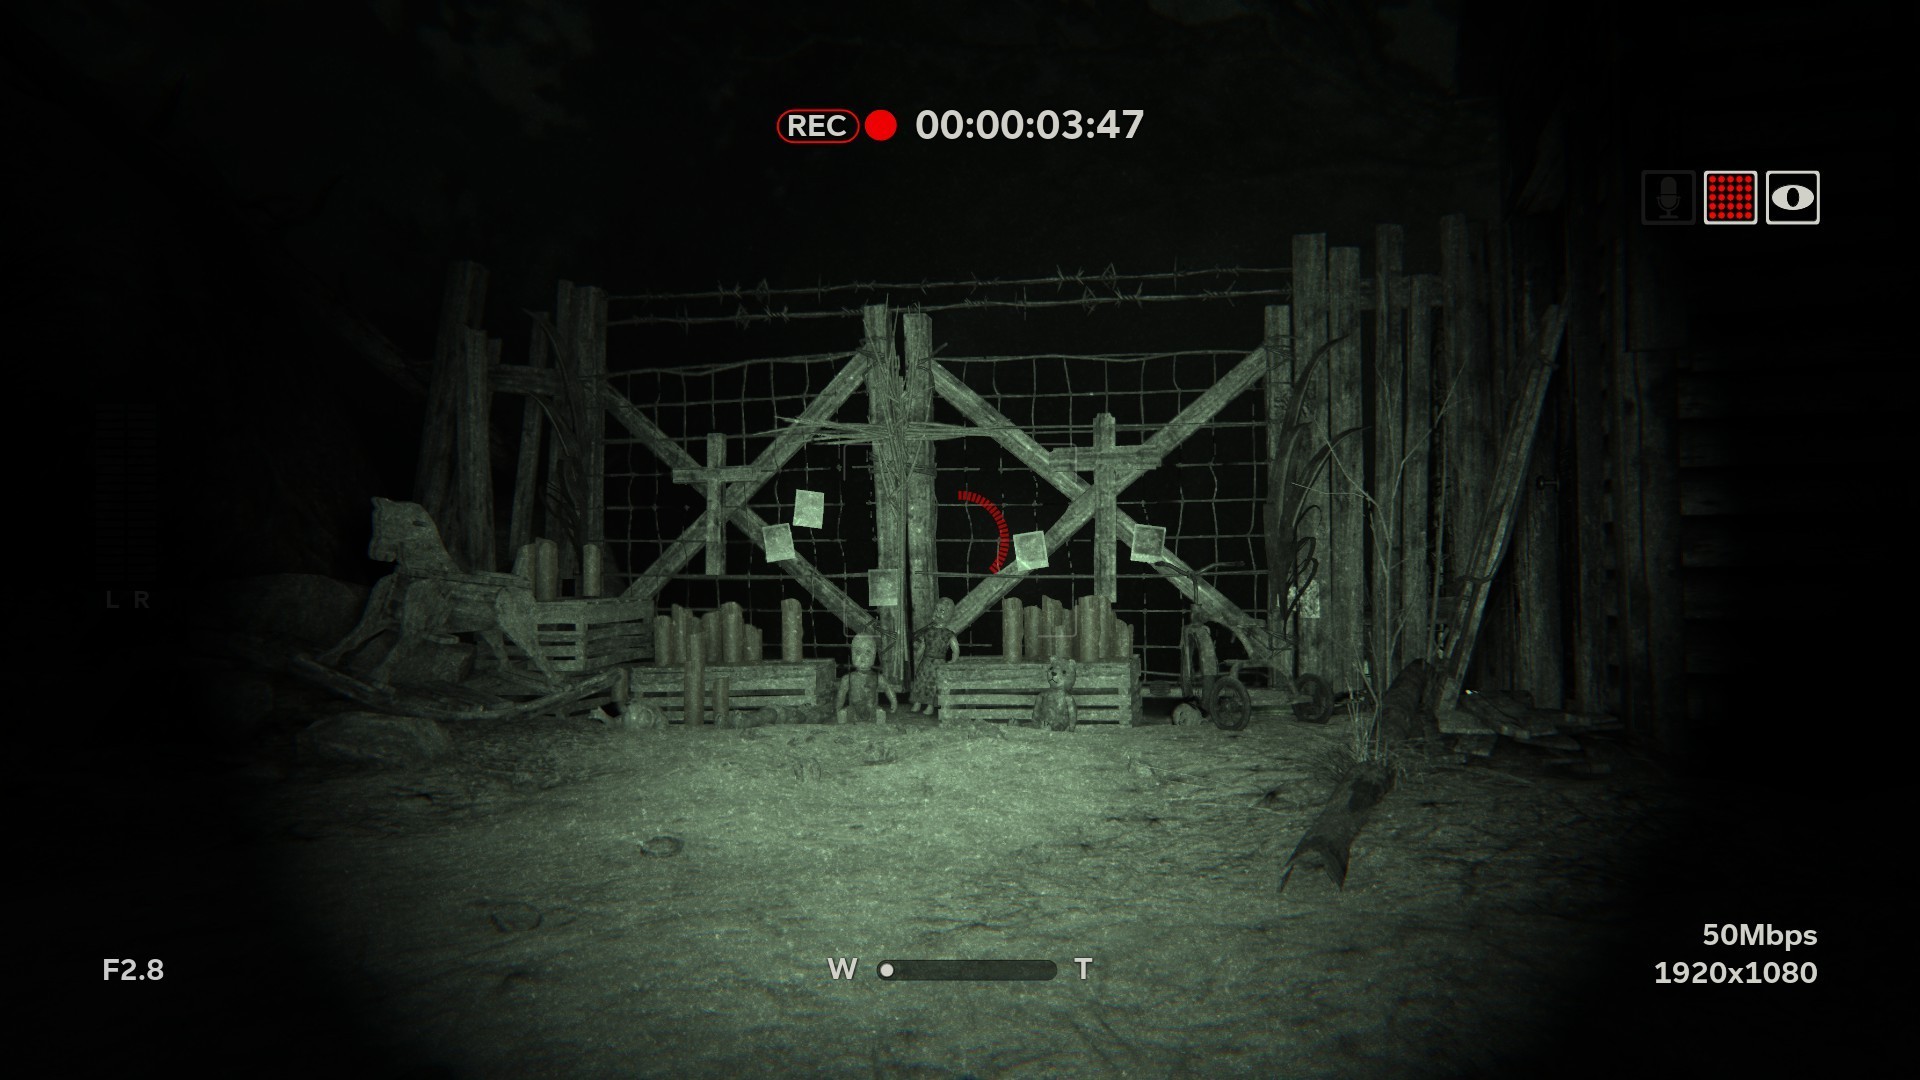 Game kinh dị PC Outlast 2